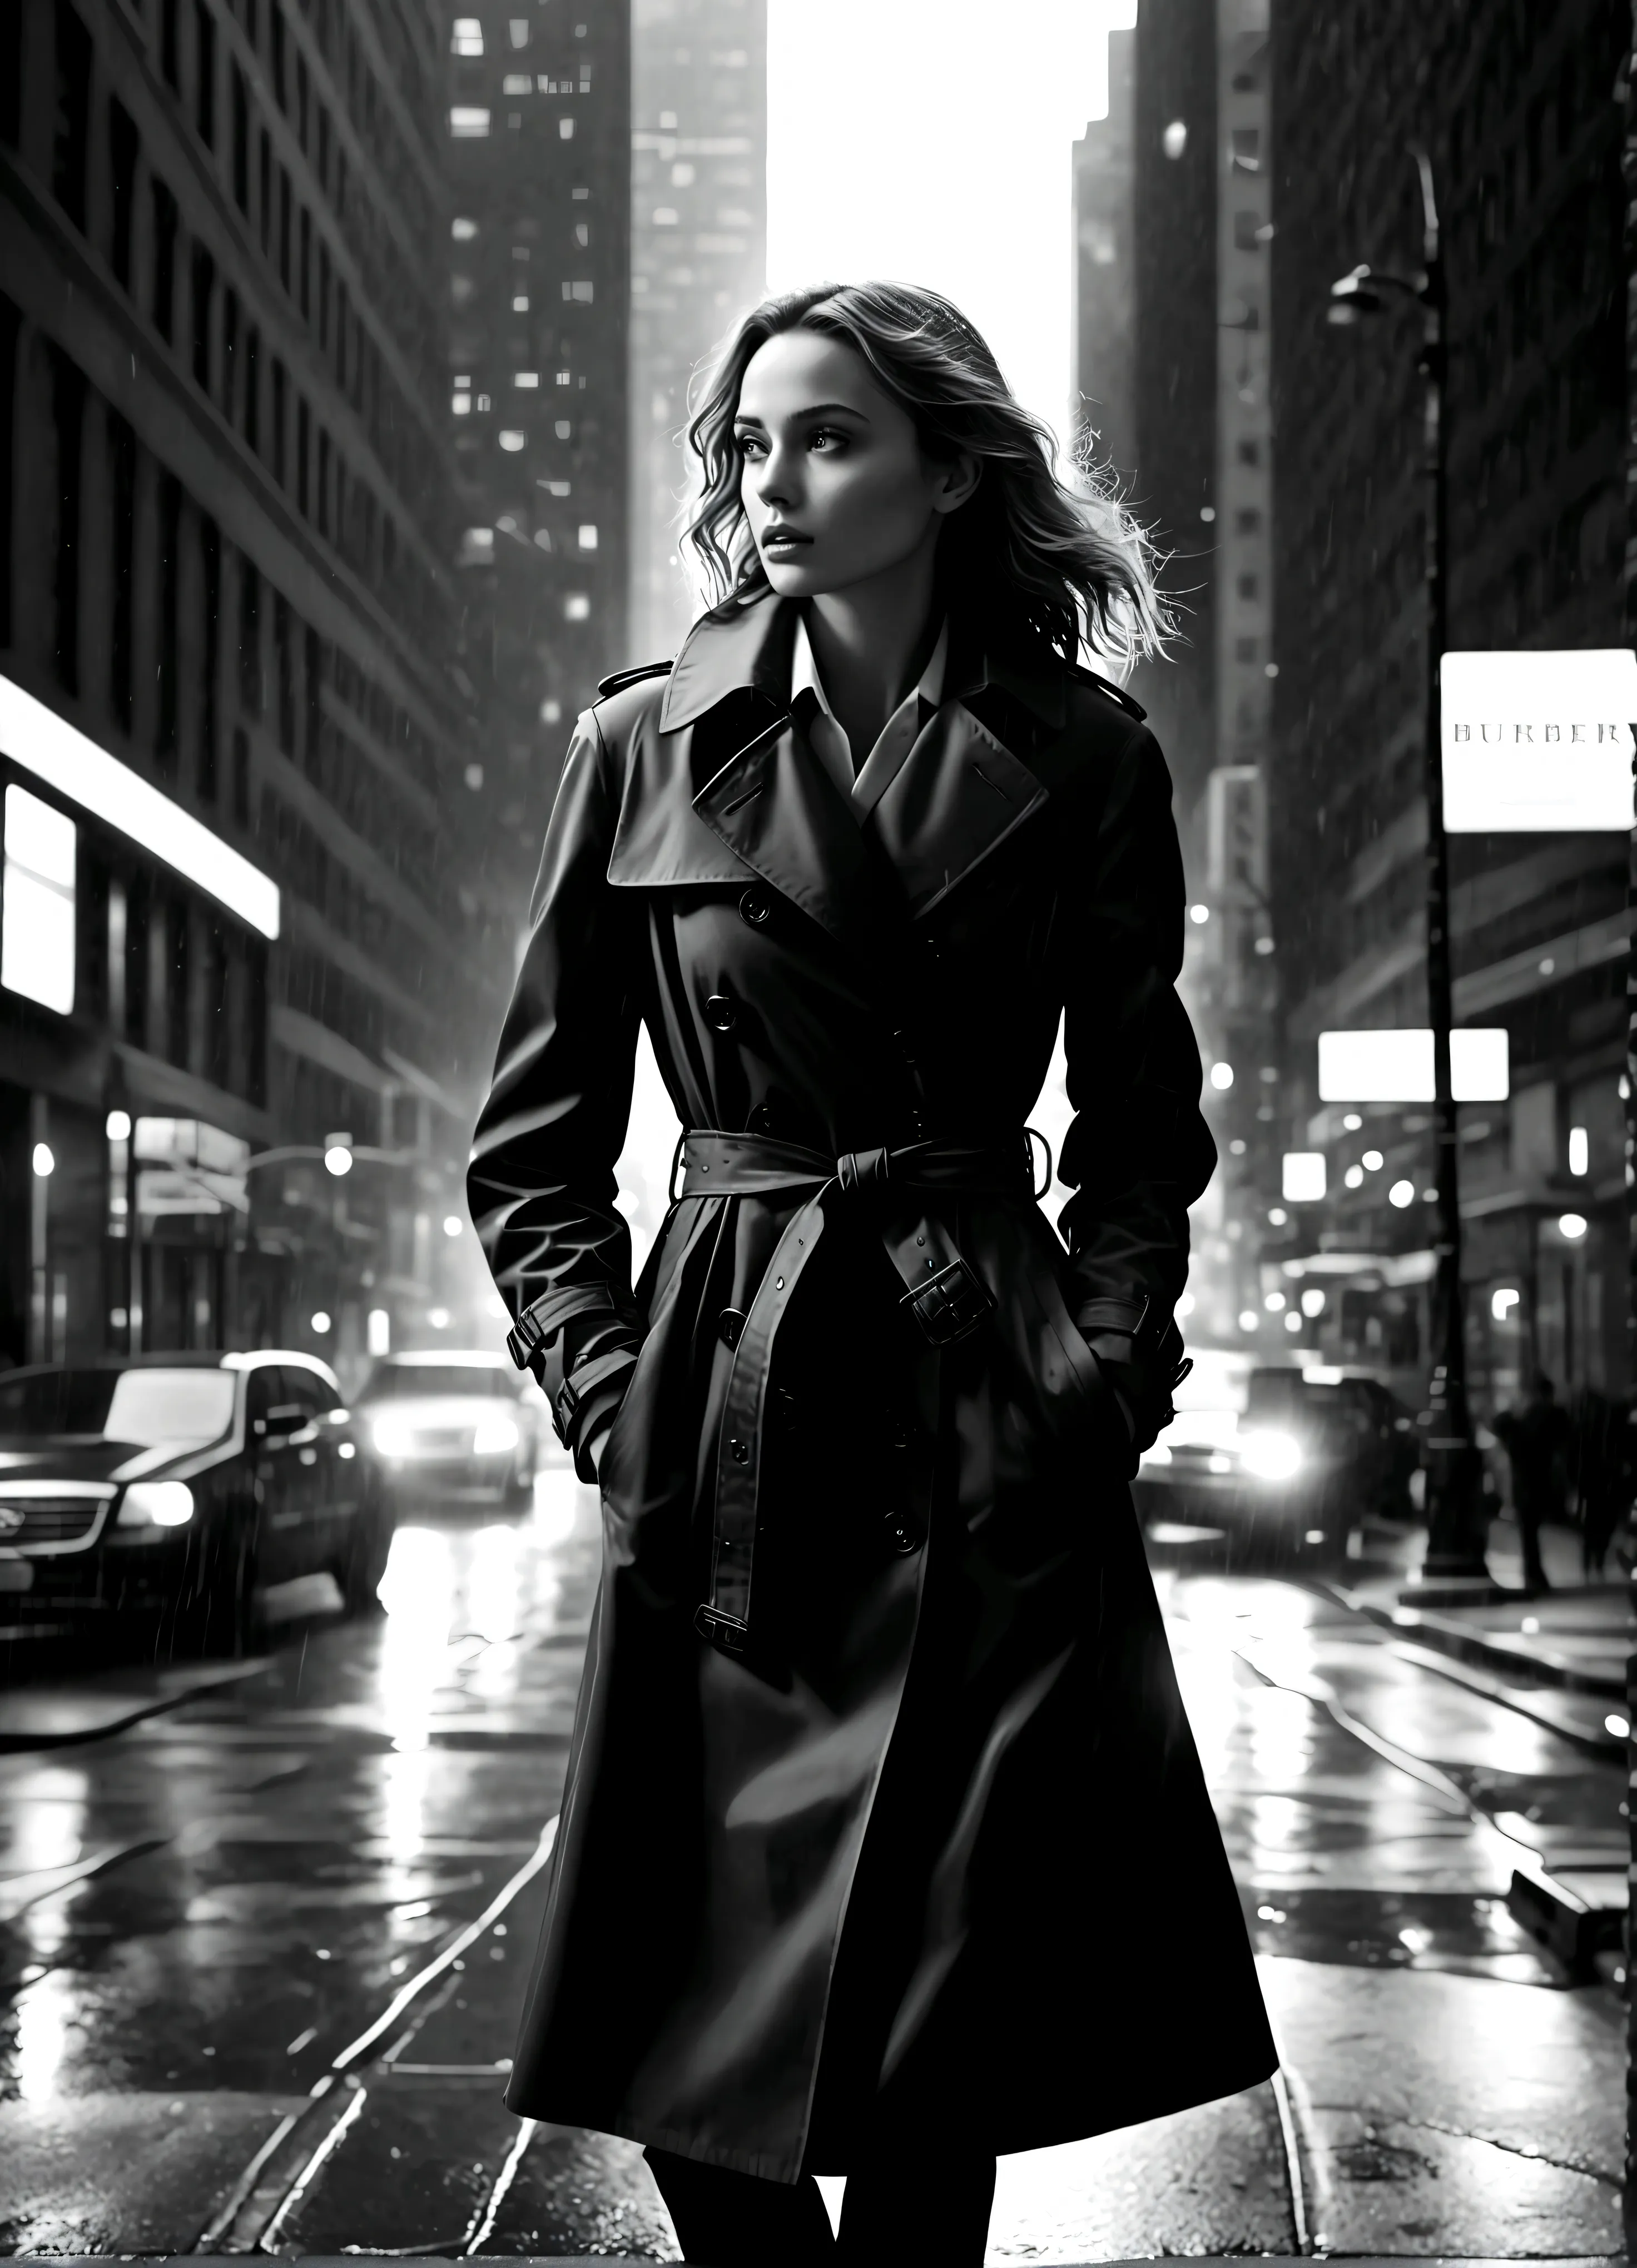 Black and white photography,In a monochrome world. The background is New York City's Manhattan, a nighttime street scene. Light ...